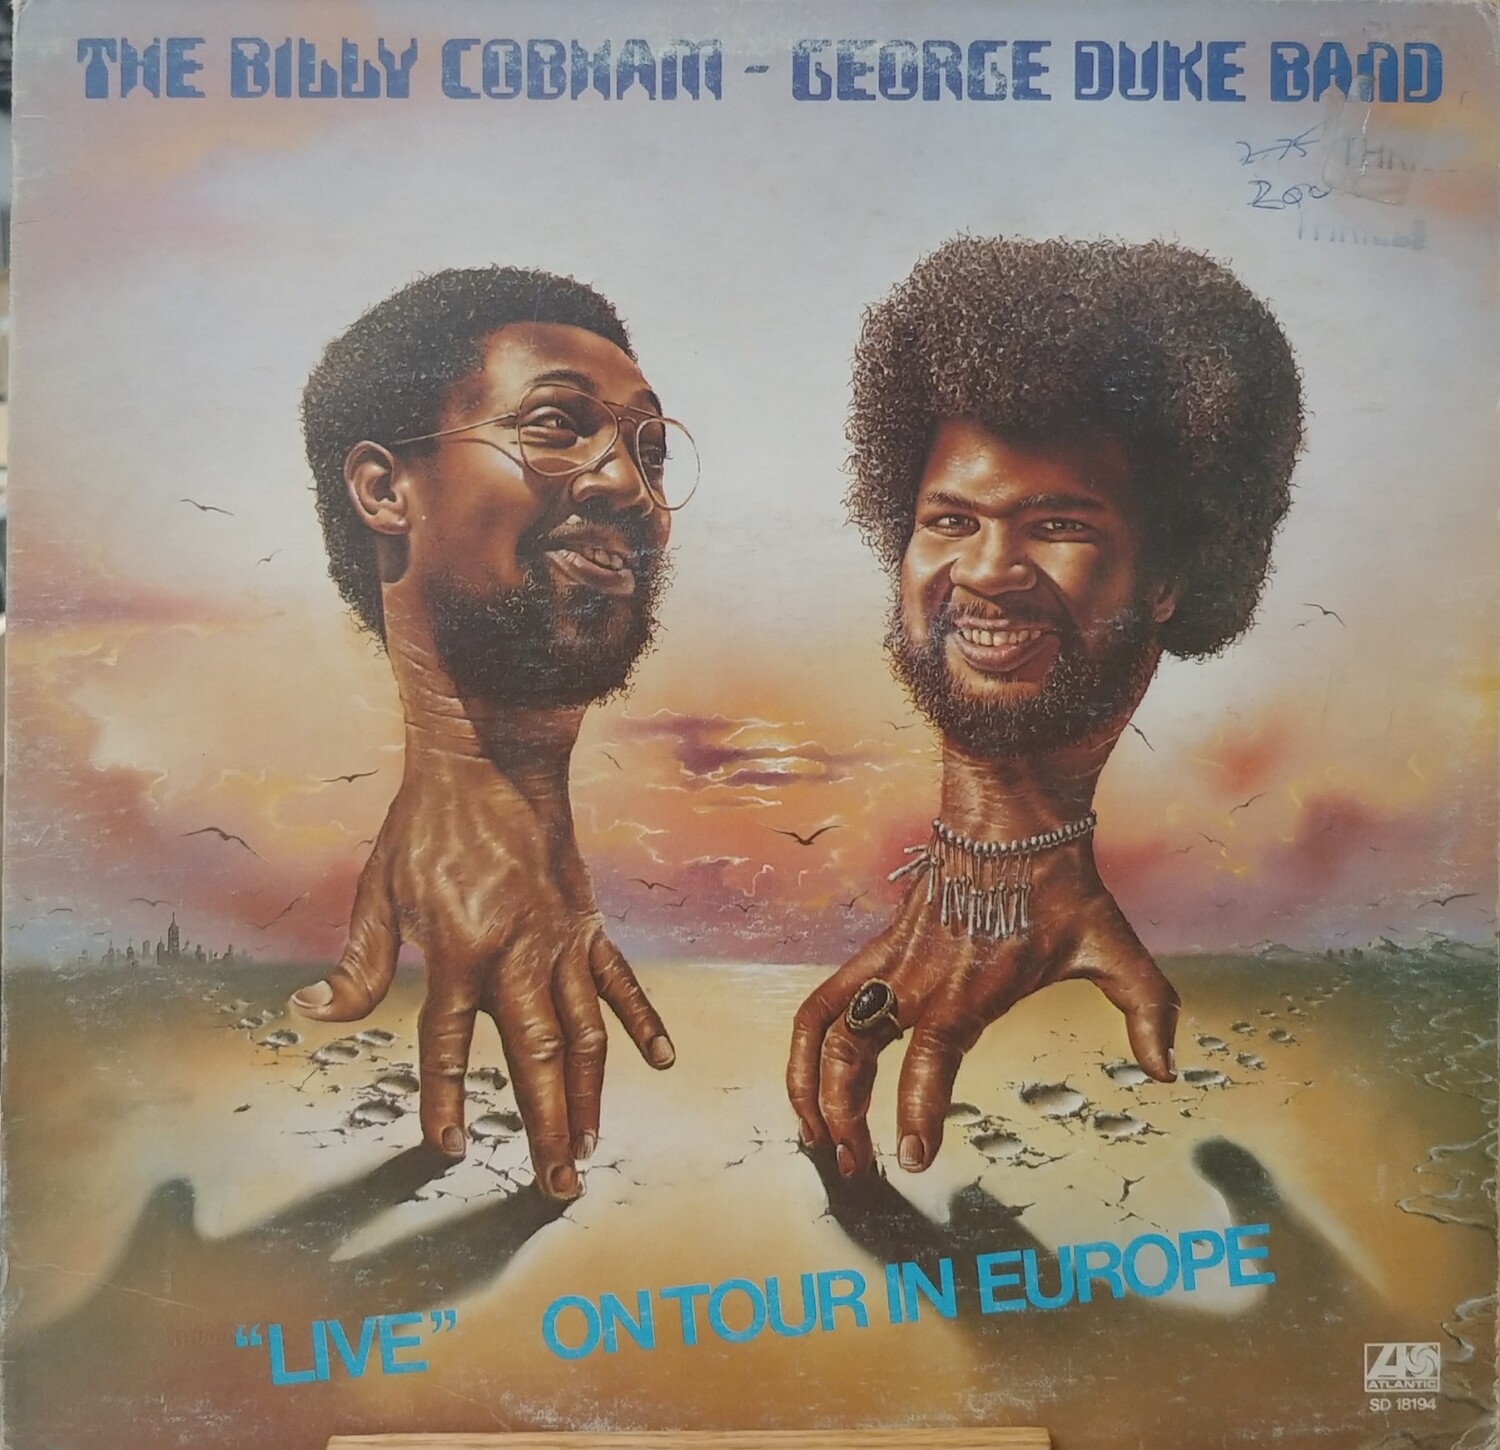 The Billy Cobham / George Duke Band - LIVE on tour in Europe